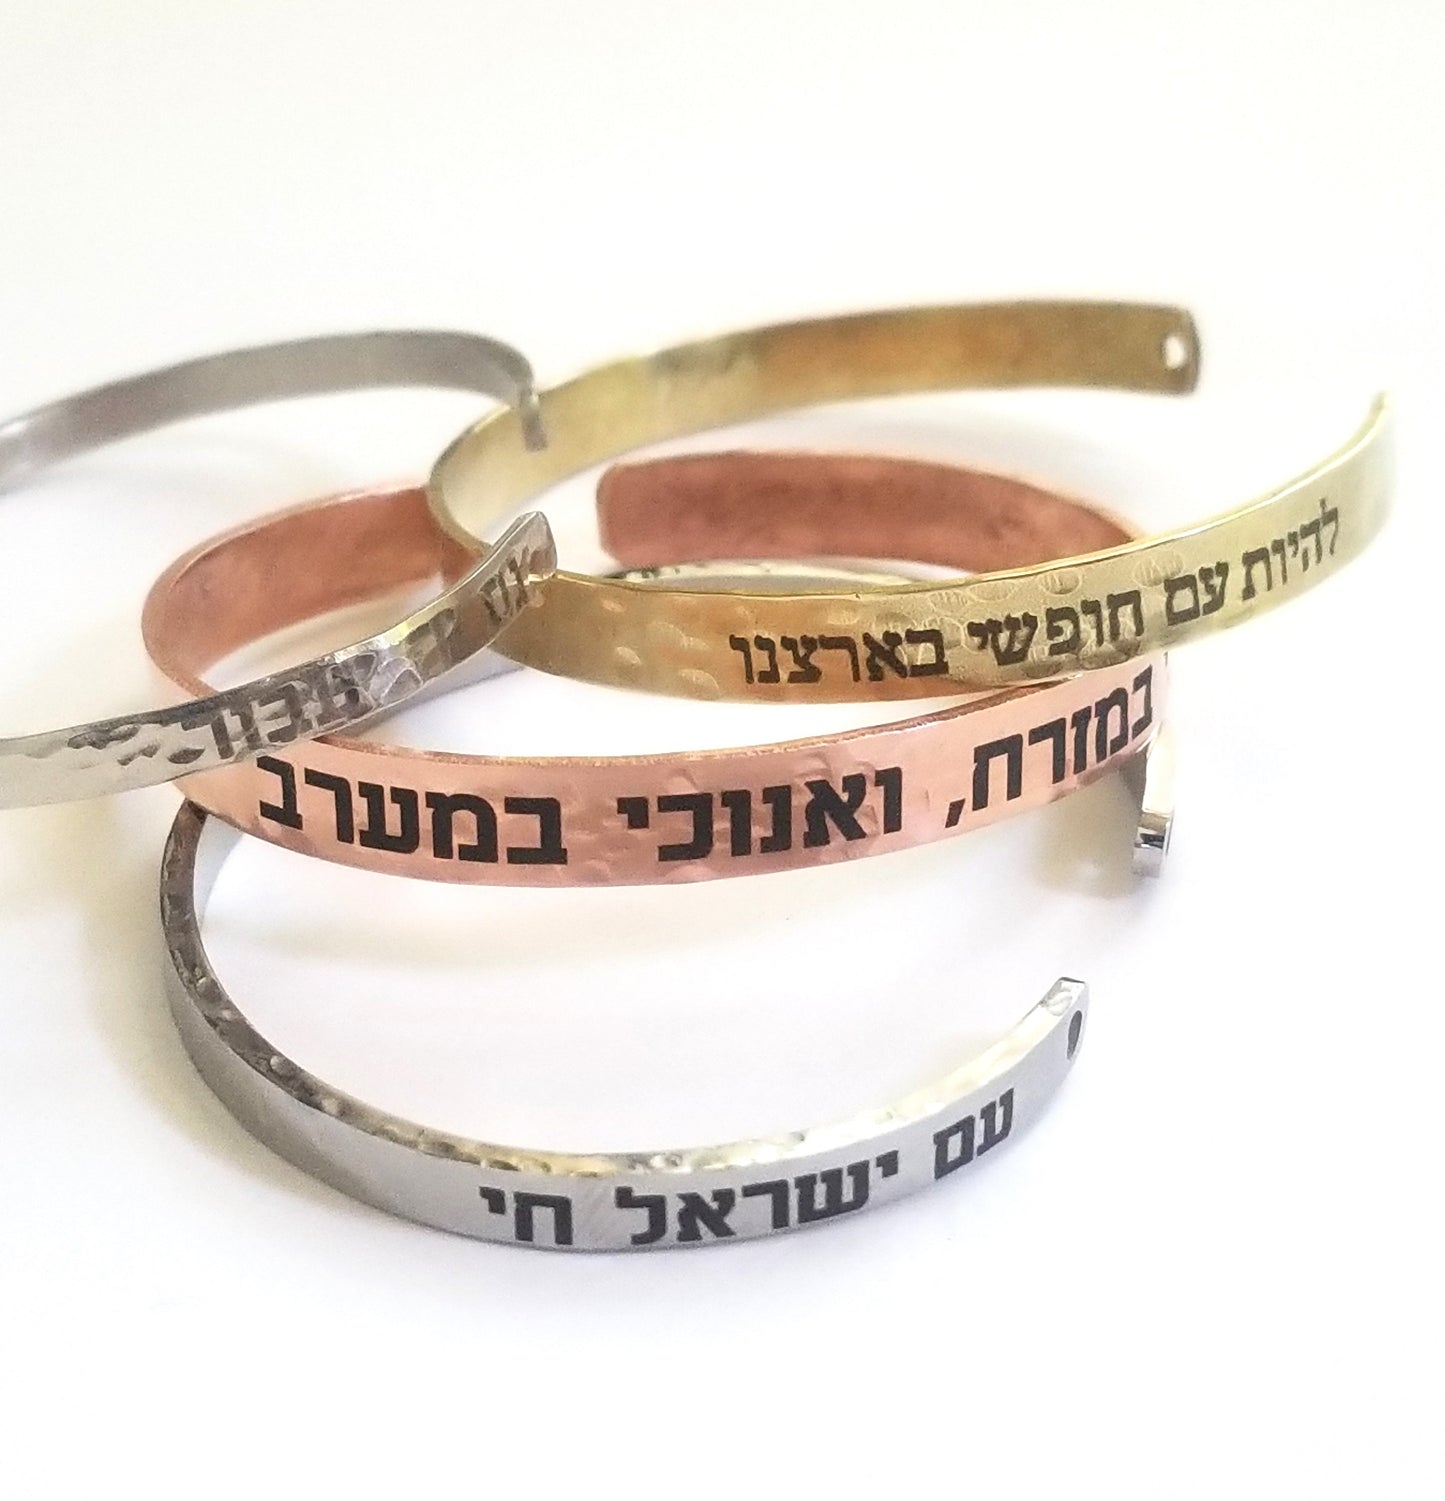 This too shell pass, Hebrew cuff bracelet, Gam Zeh Yaavor, Silver thin engraved bangle, encouragement gift, Am Israel Chai, Hebrew Quote